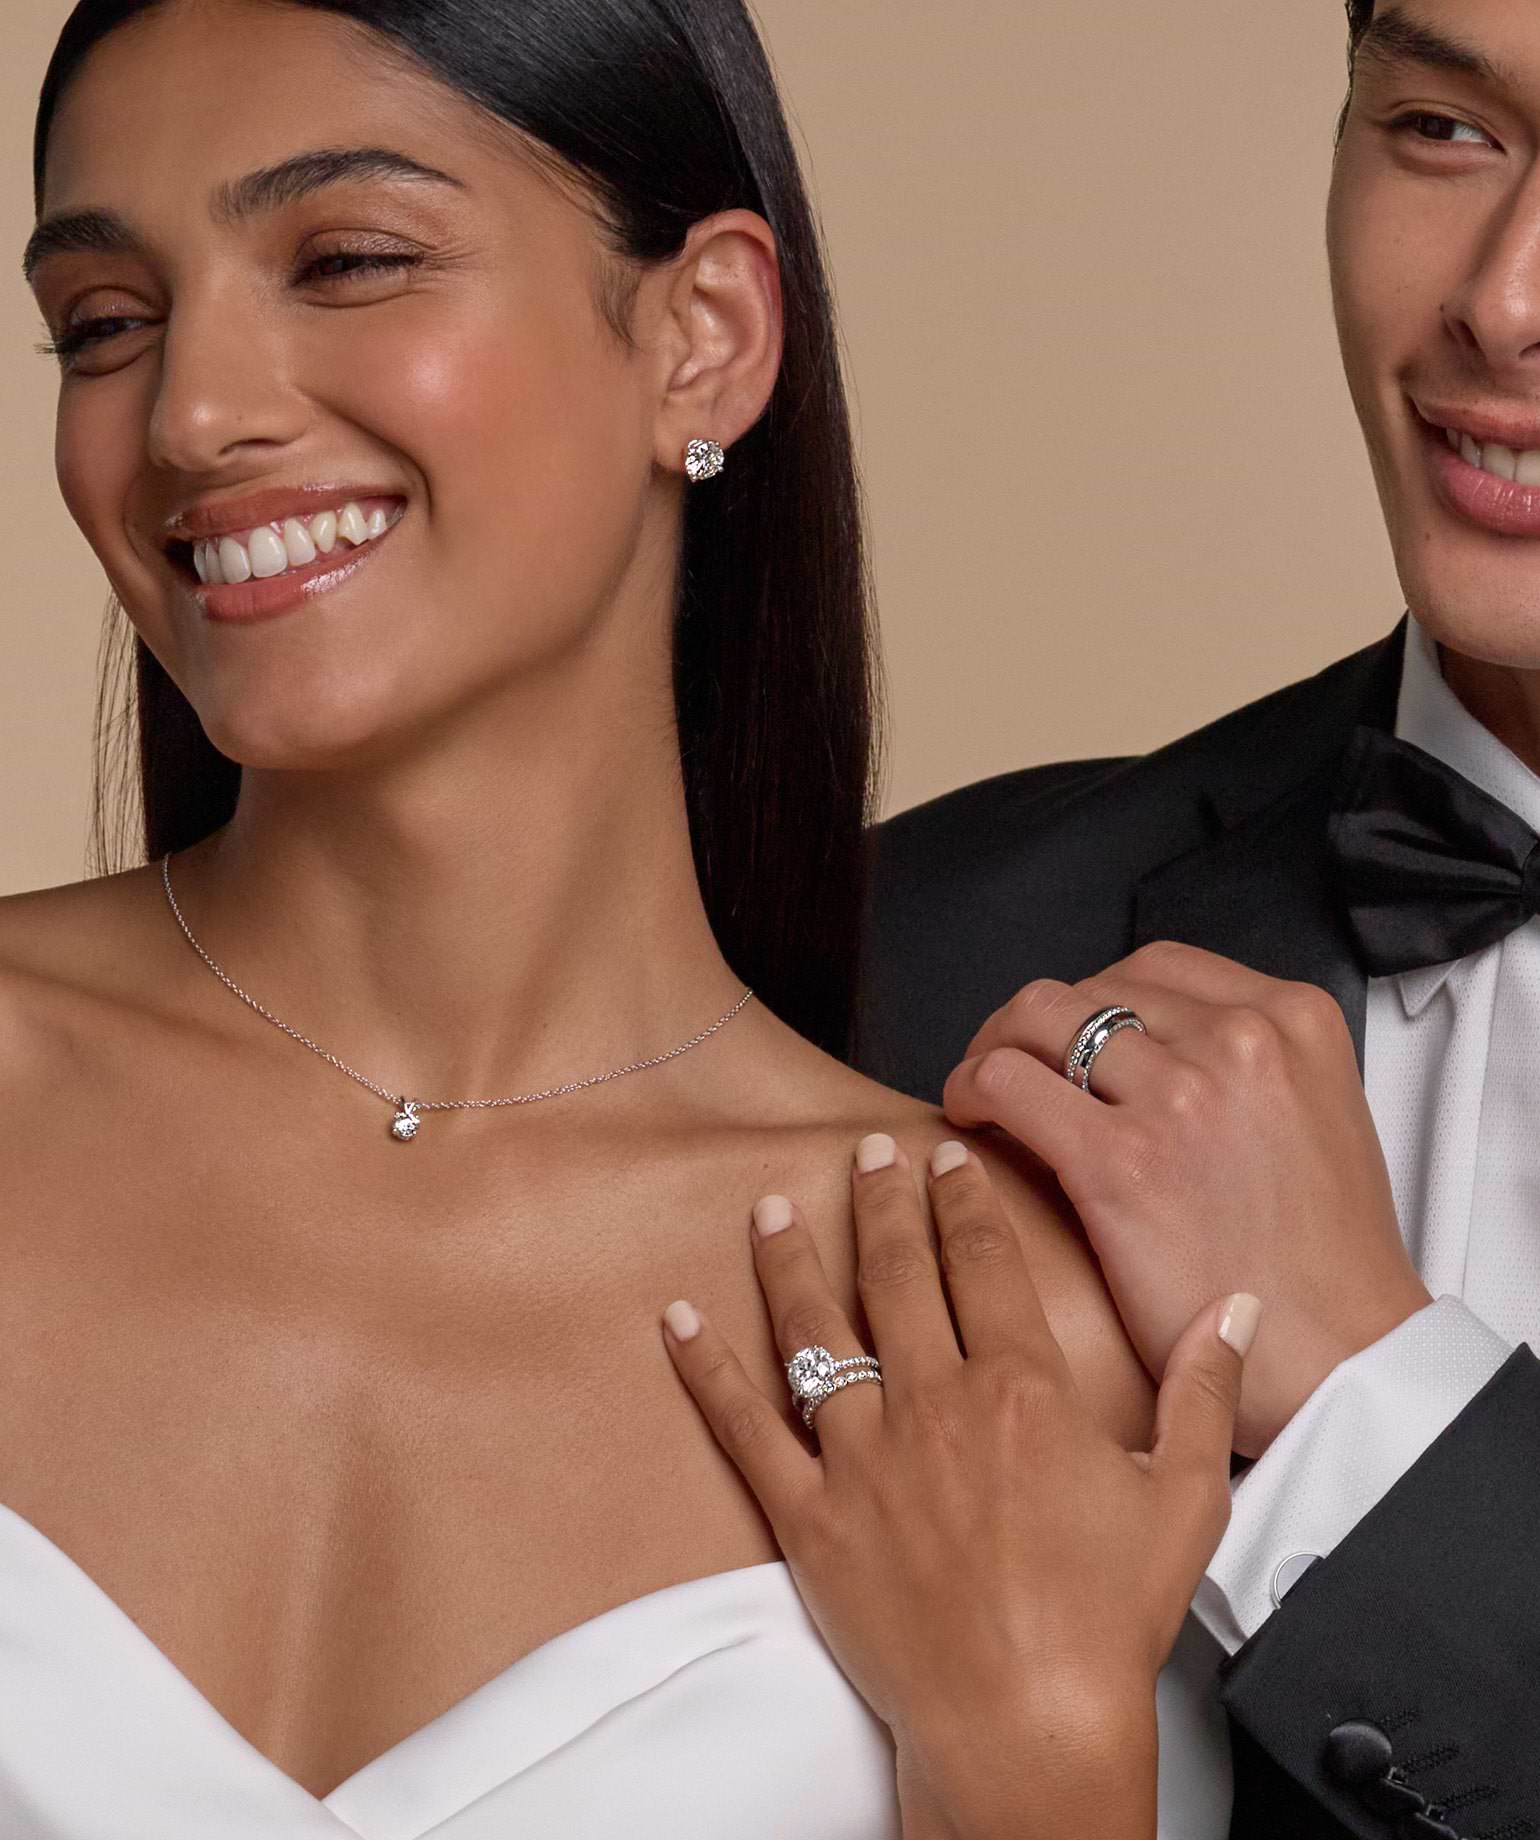 A smiling couple with the man wearing a wedding band and the woman wearing diamond earrings and necklace